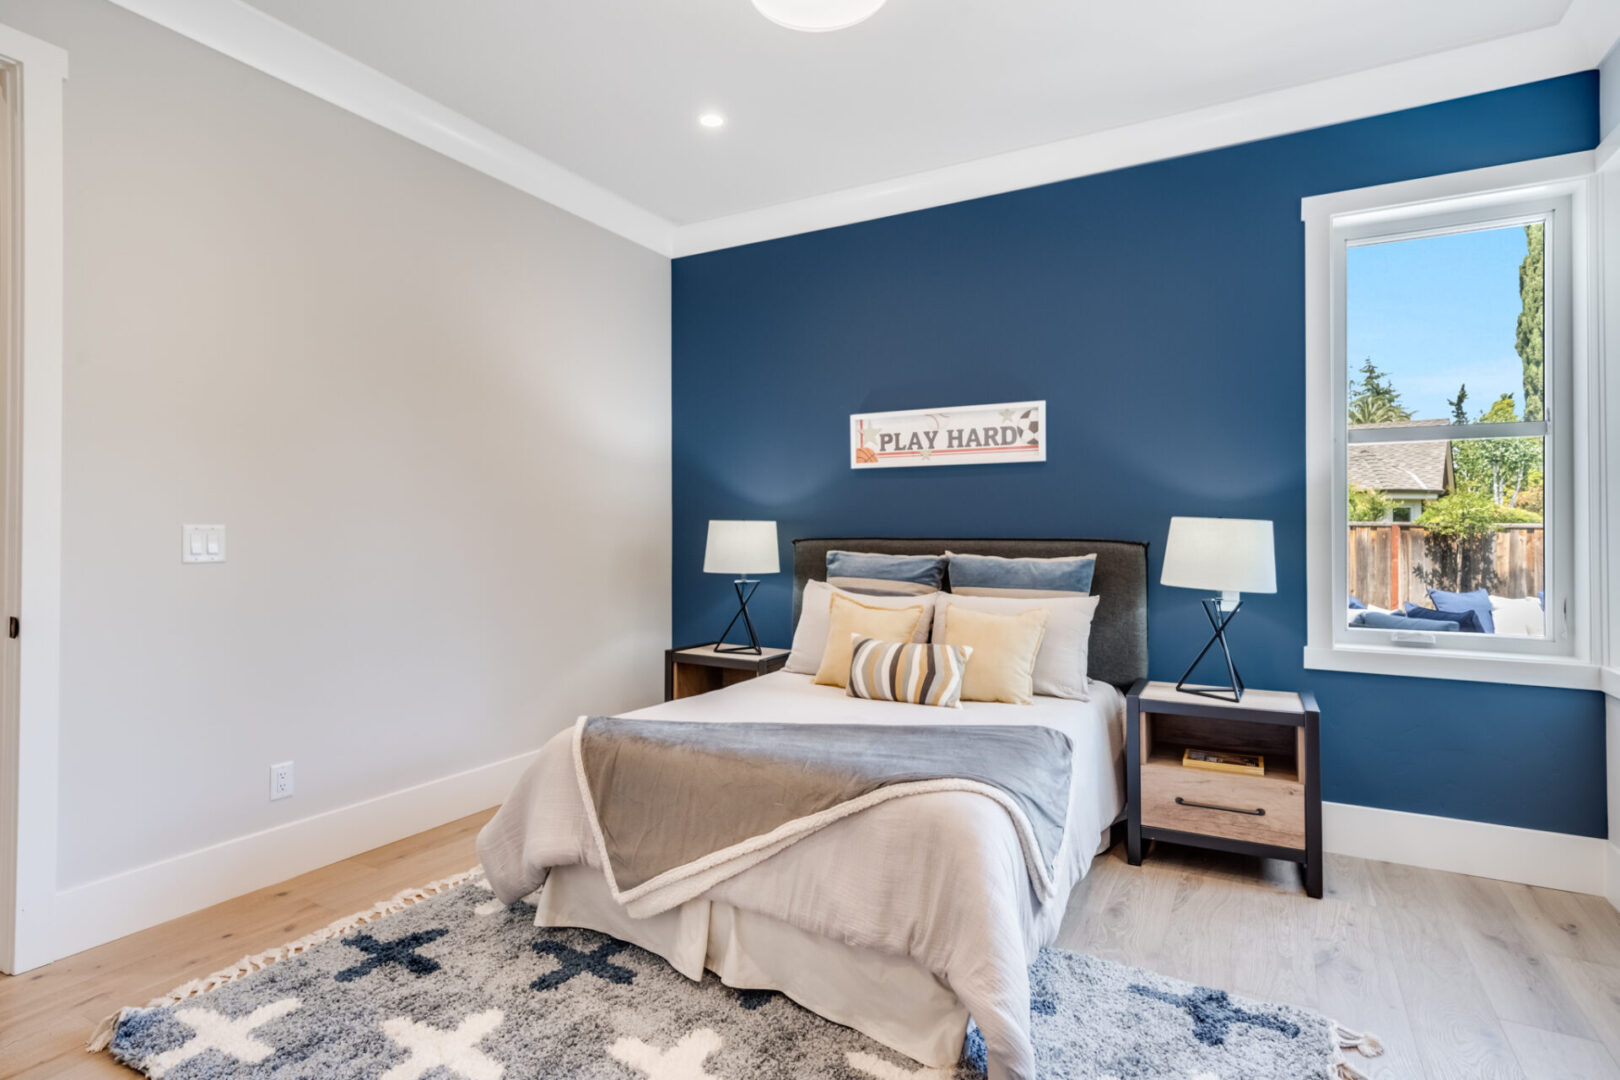 A bedroom with blue walls and white bedding.